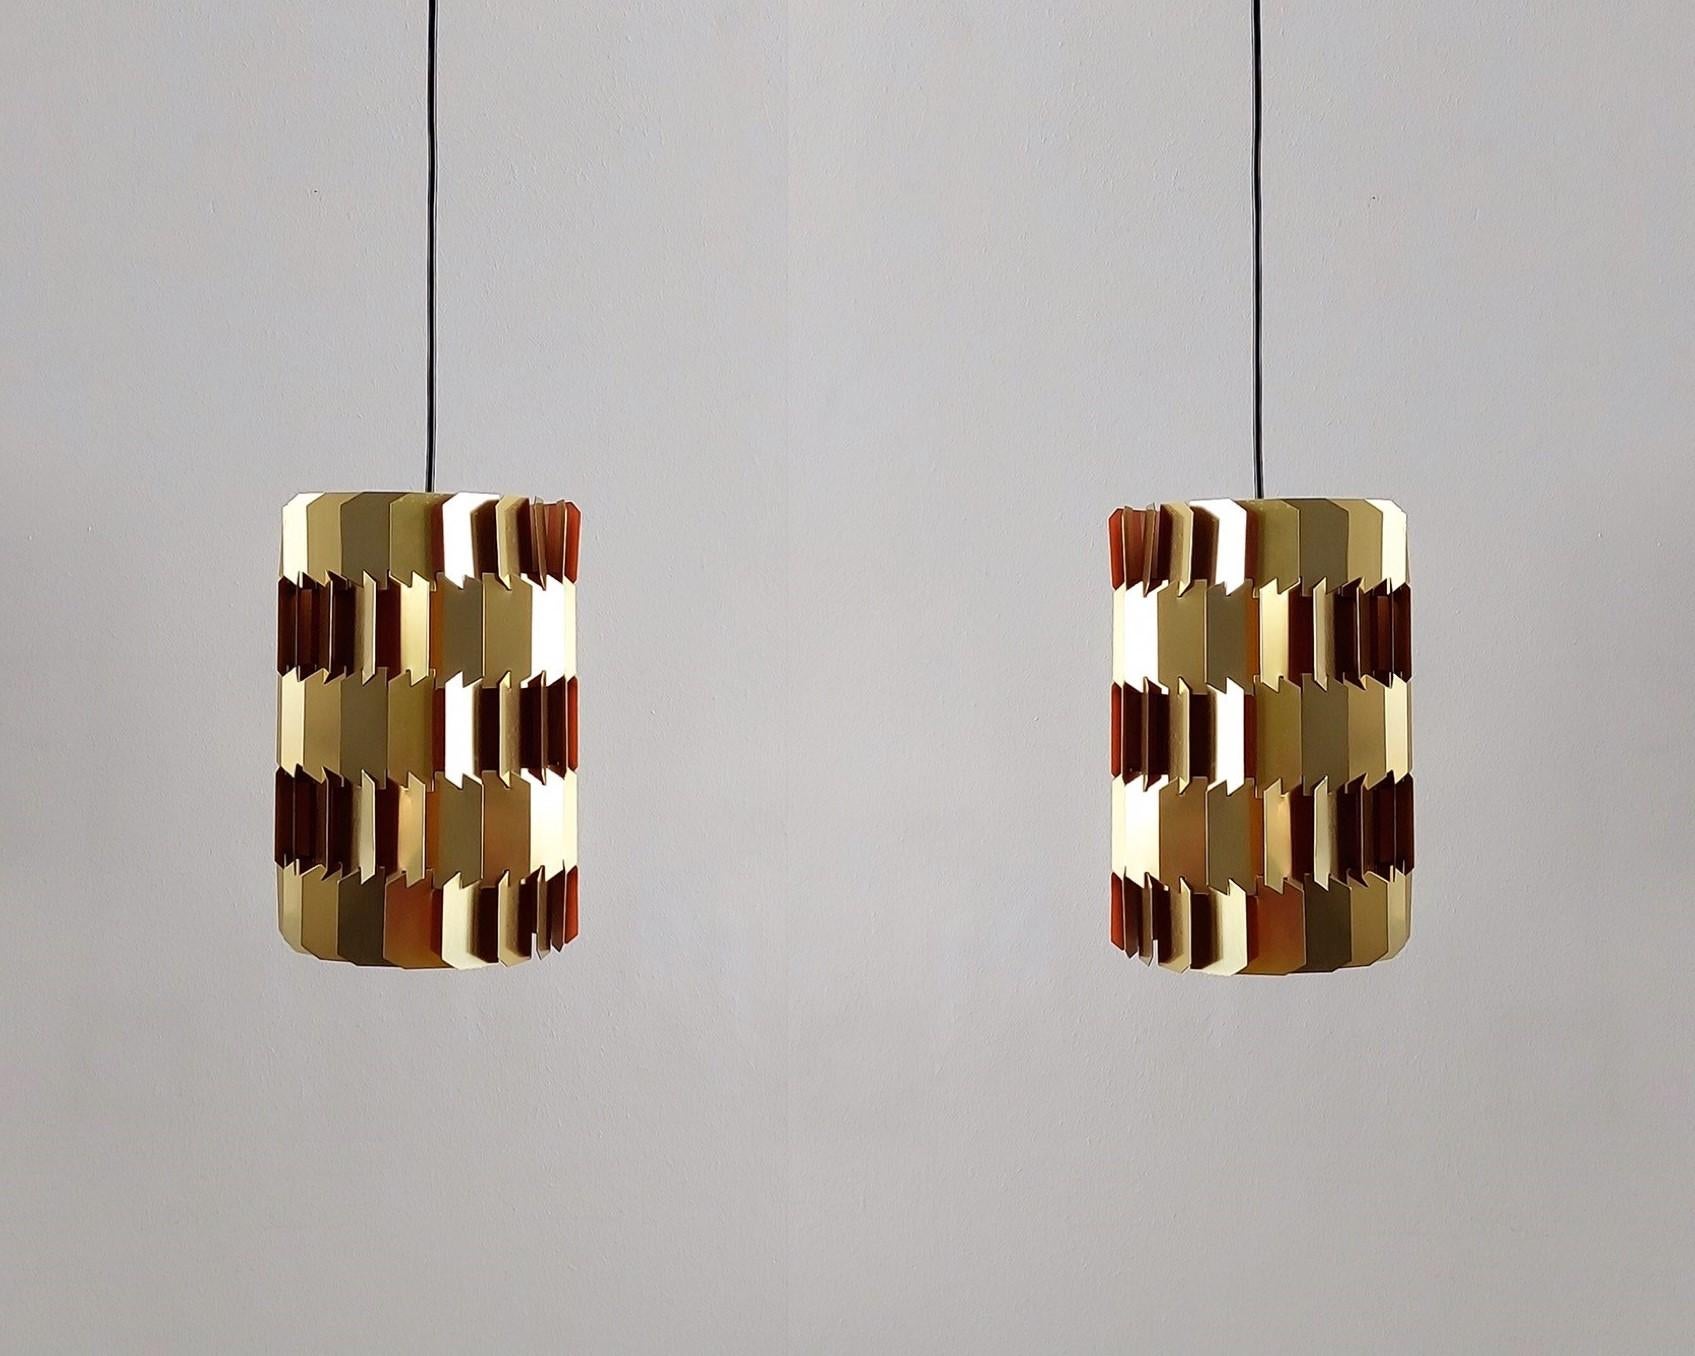 The 'Facet-pop' pendant lamp was designed by Louis Weisdorf for Lyfa in Denmark in the 1960's. It is made out of many small metal parts that are put together. The dynamic layered shape is a true signature of Weisdorf. It has a gold coloured outside